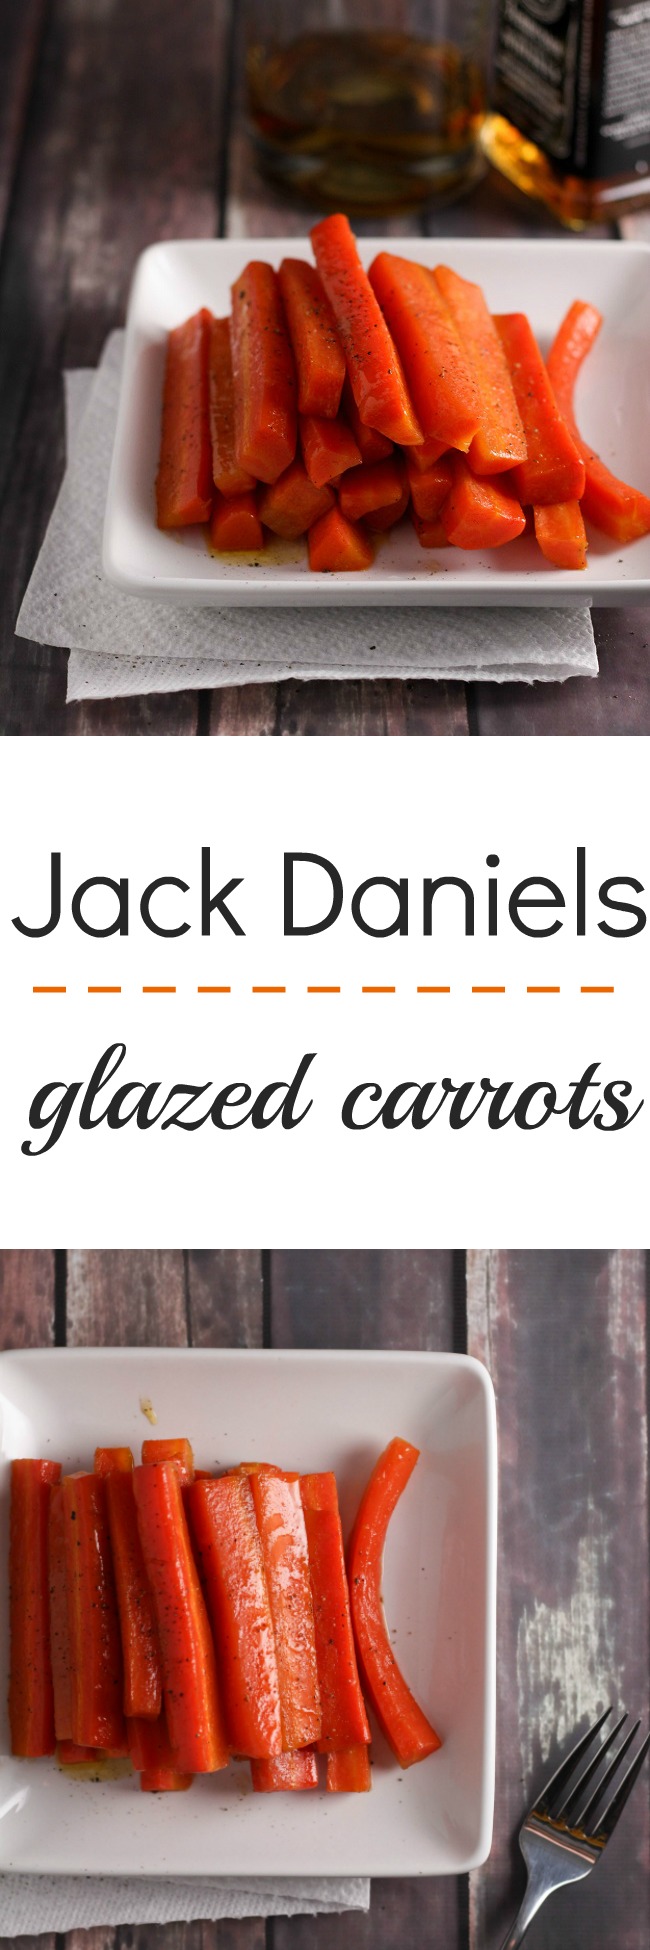 Slightly boozy, and very yummy, Jack Daniels glazed carrots. This recipe is a delicious side for dinner!